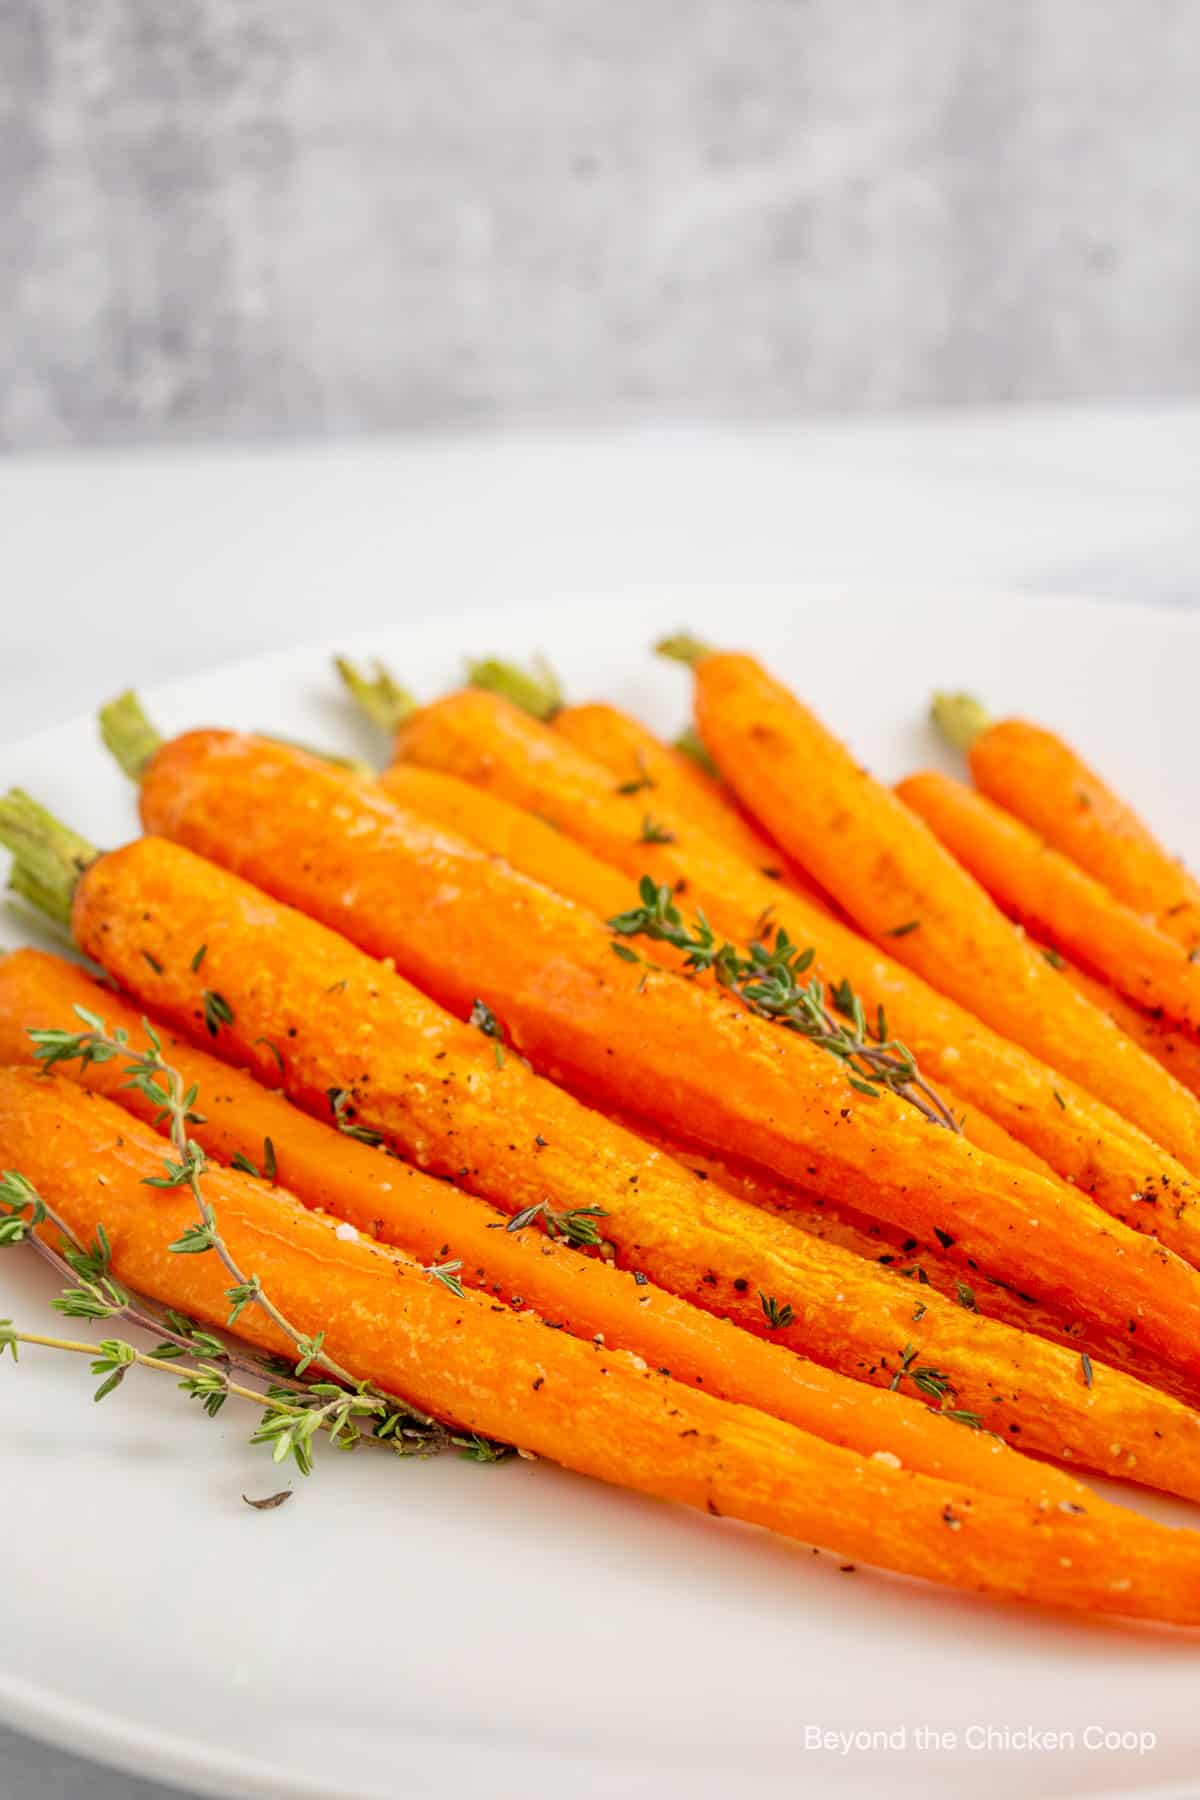 Carrots topped with herbs.